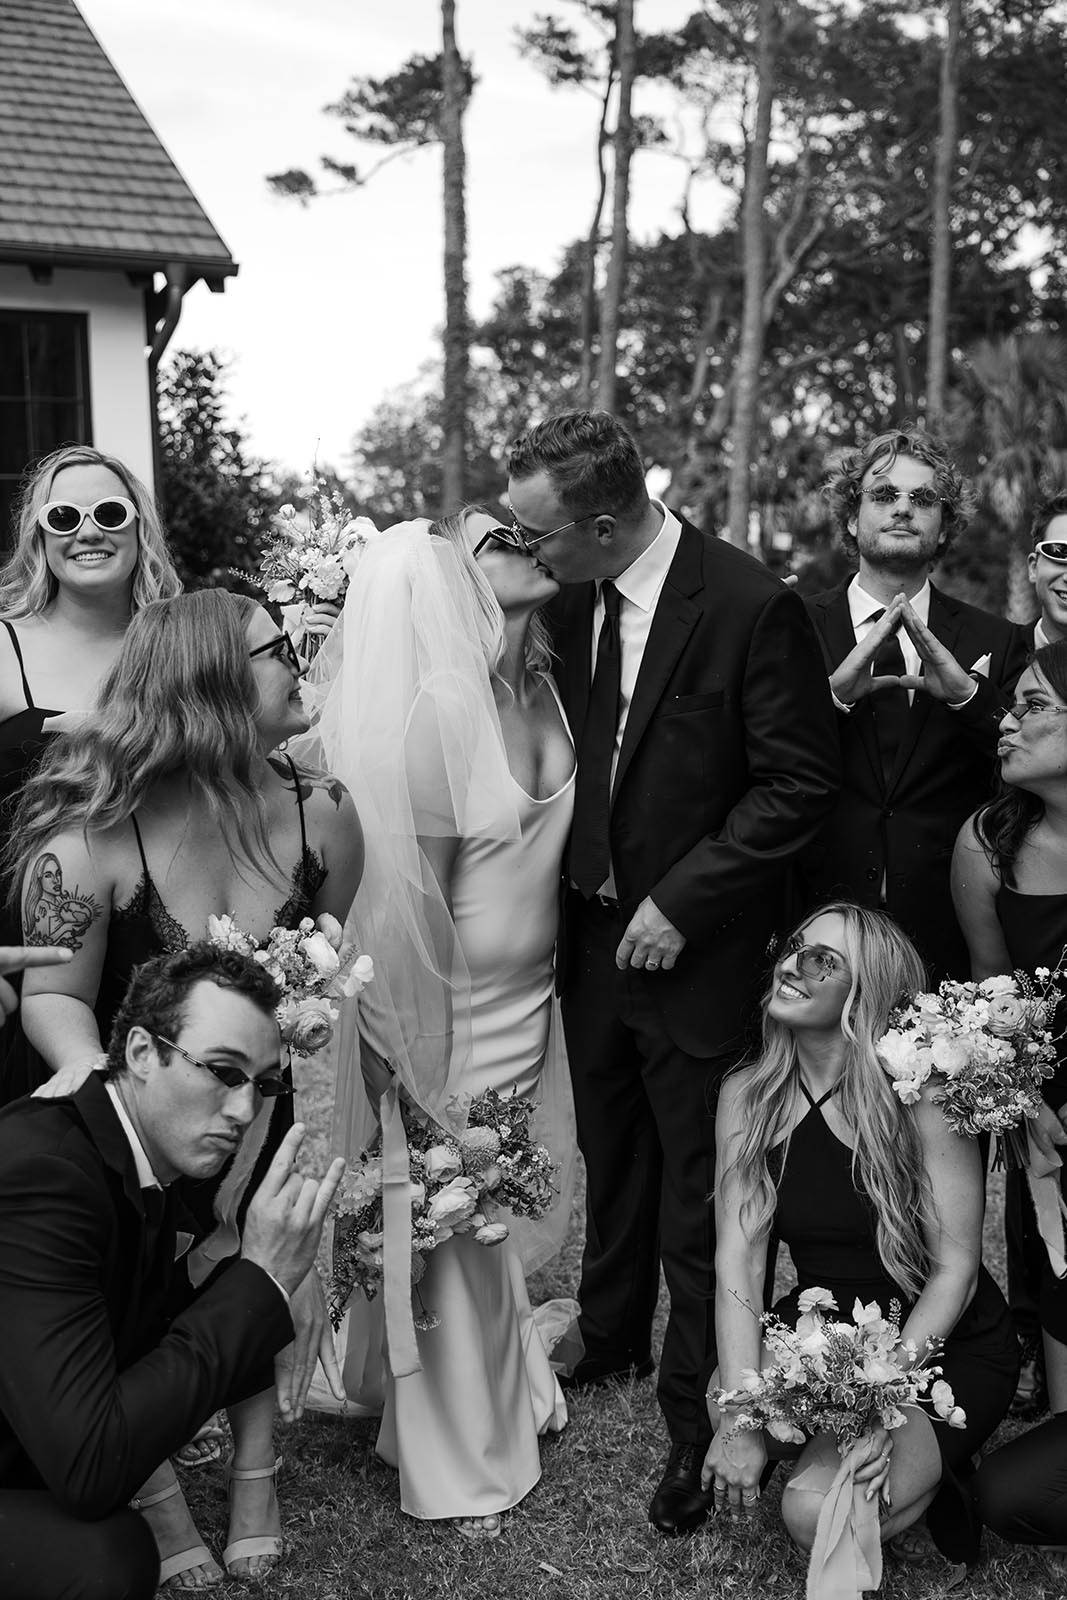 Classic black and white photograph capturing a heartwarming moment as the bride lovingly kisses the groom, while surrounded by joyful bridesmaids